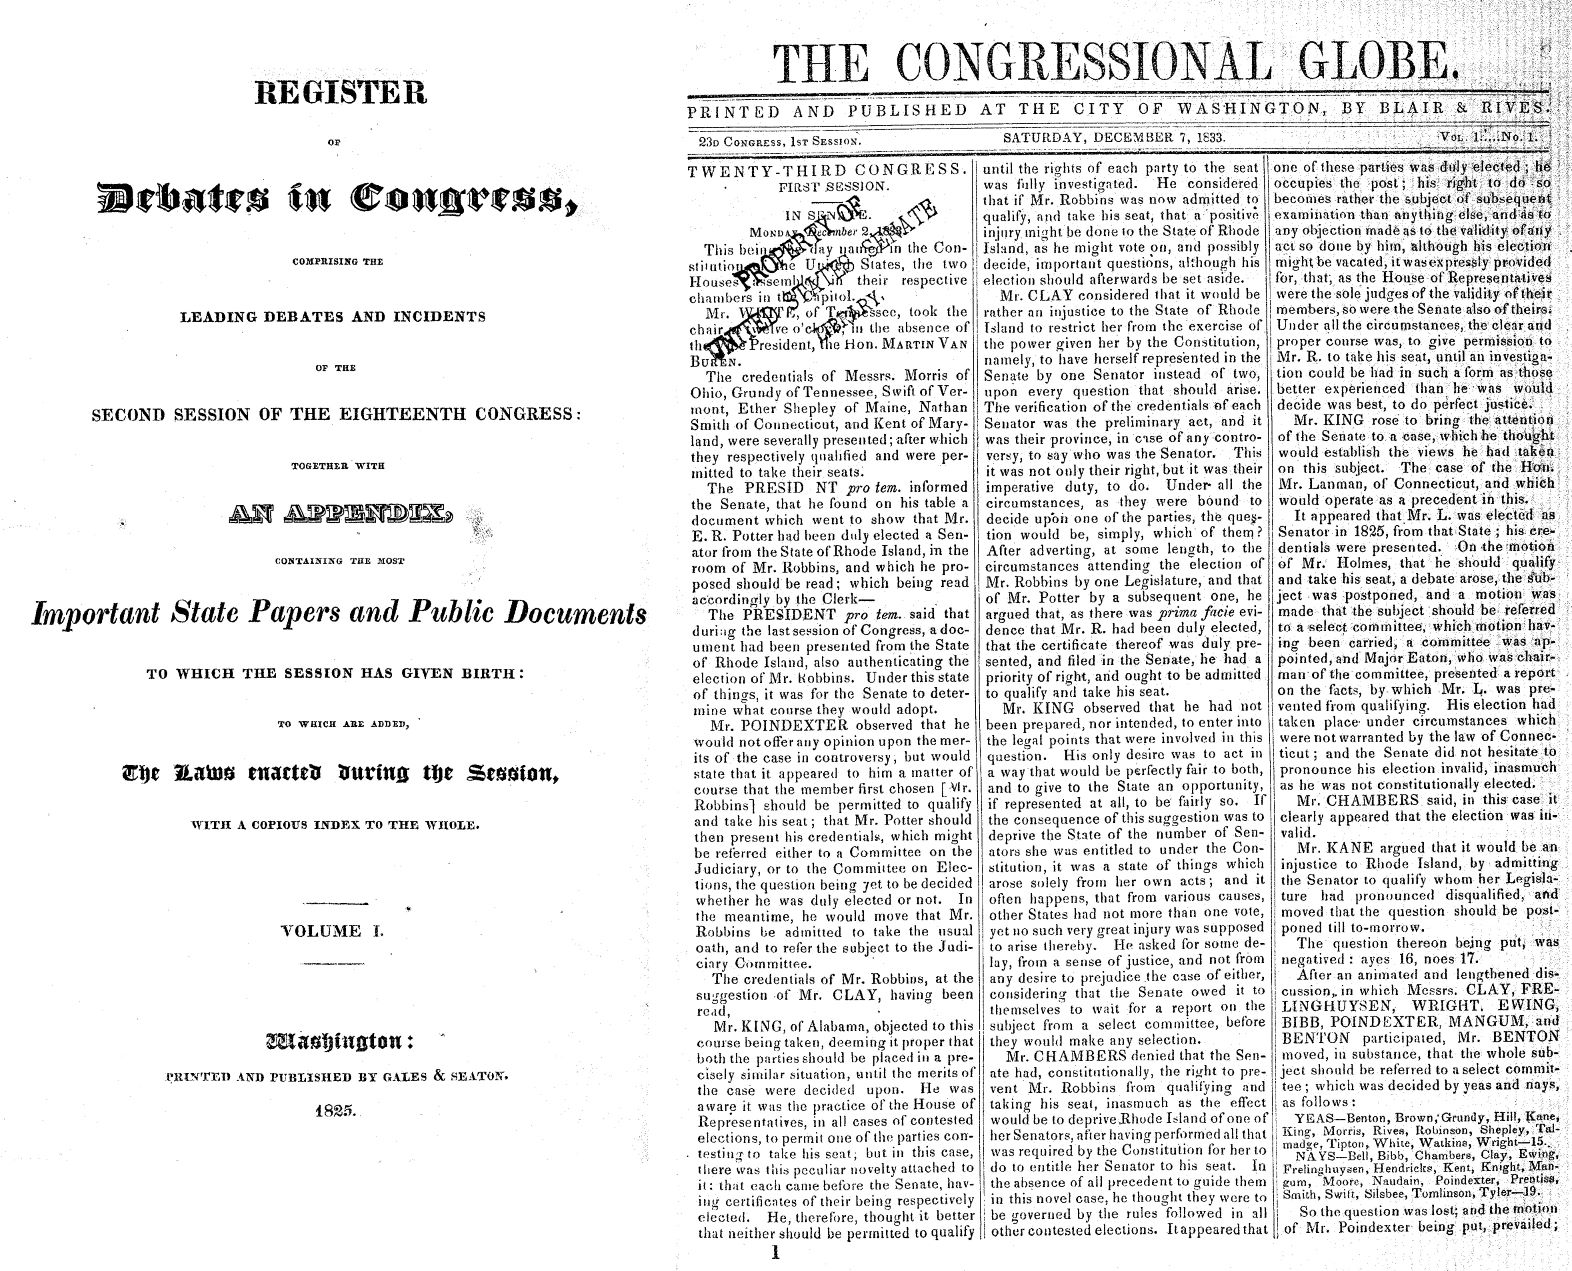 “A Deficiency in our Political Annals”: Rivals of Early Congressional Reporting